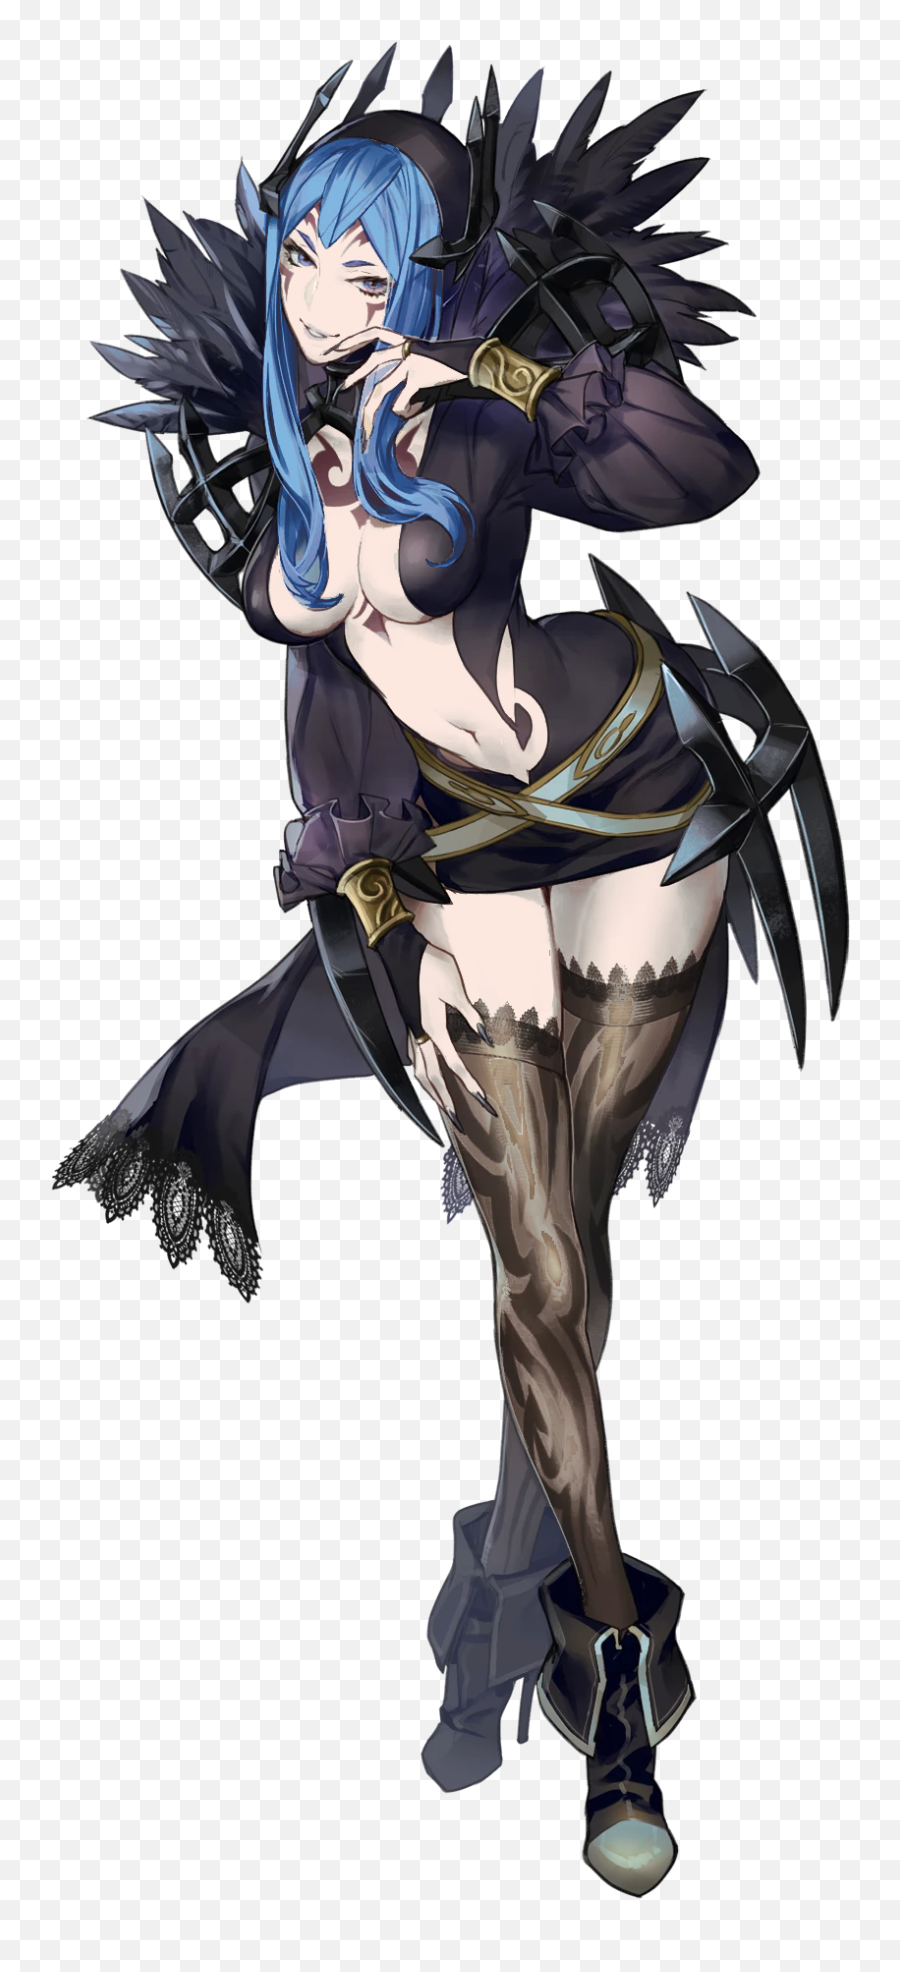 Lucina Png - Lucina Probably 4038953 Vippng Aversa Fire Emblem Heroes,Lucina Png